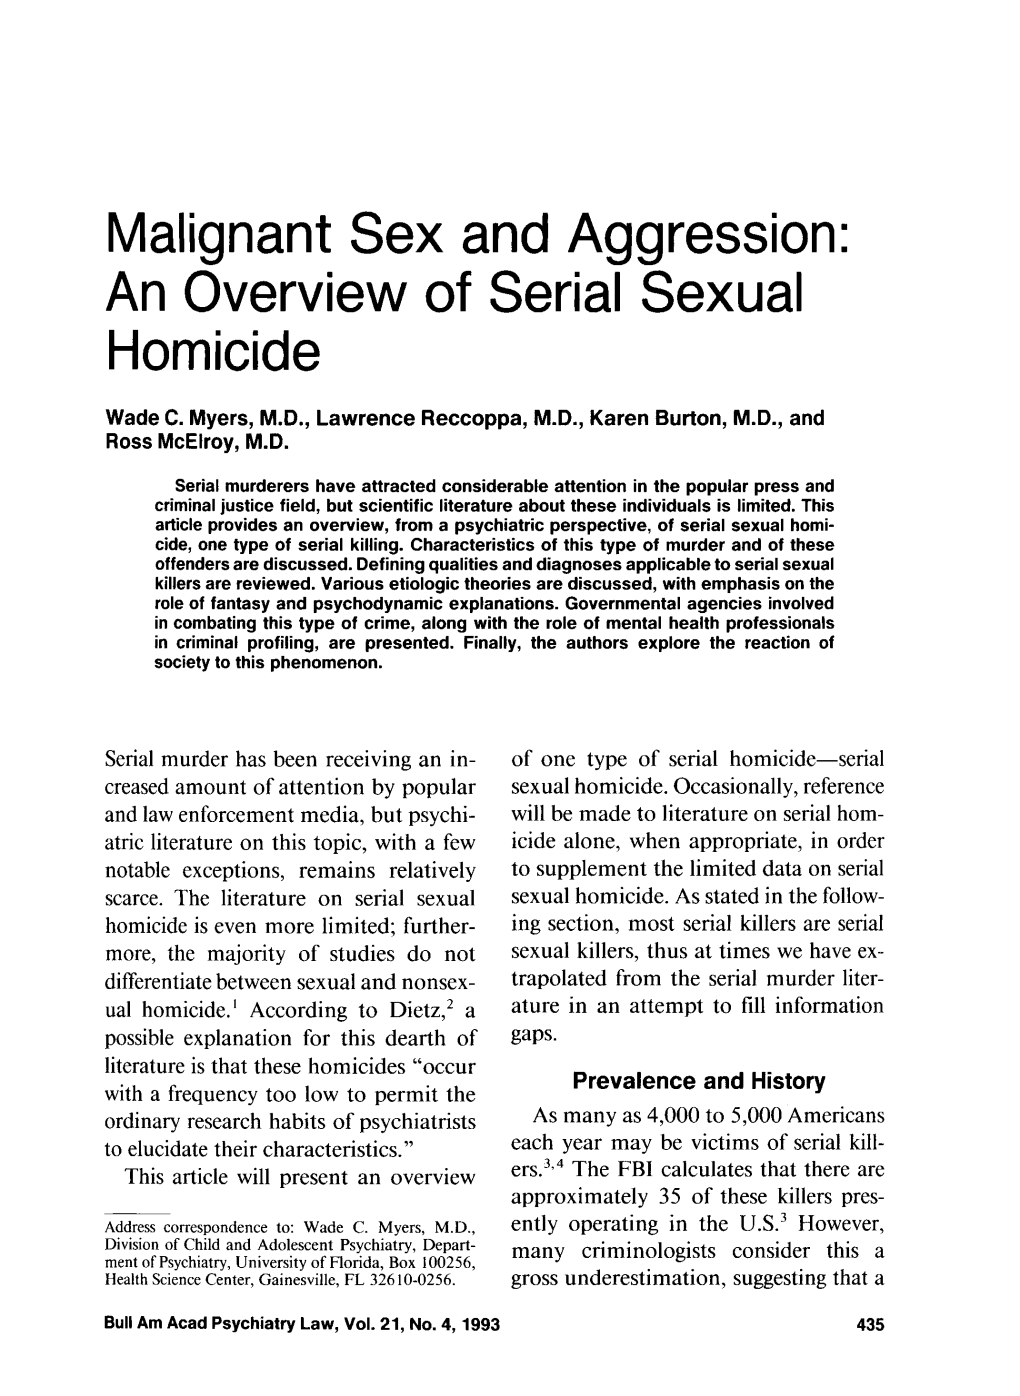 An Overview of Serial Sexual Homicide